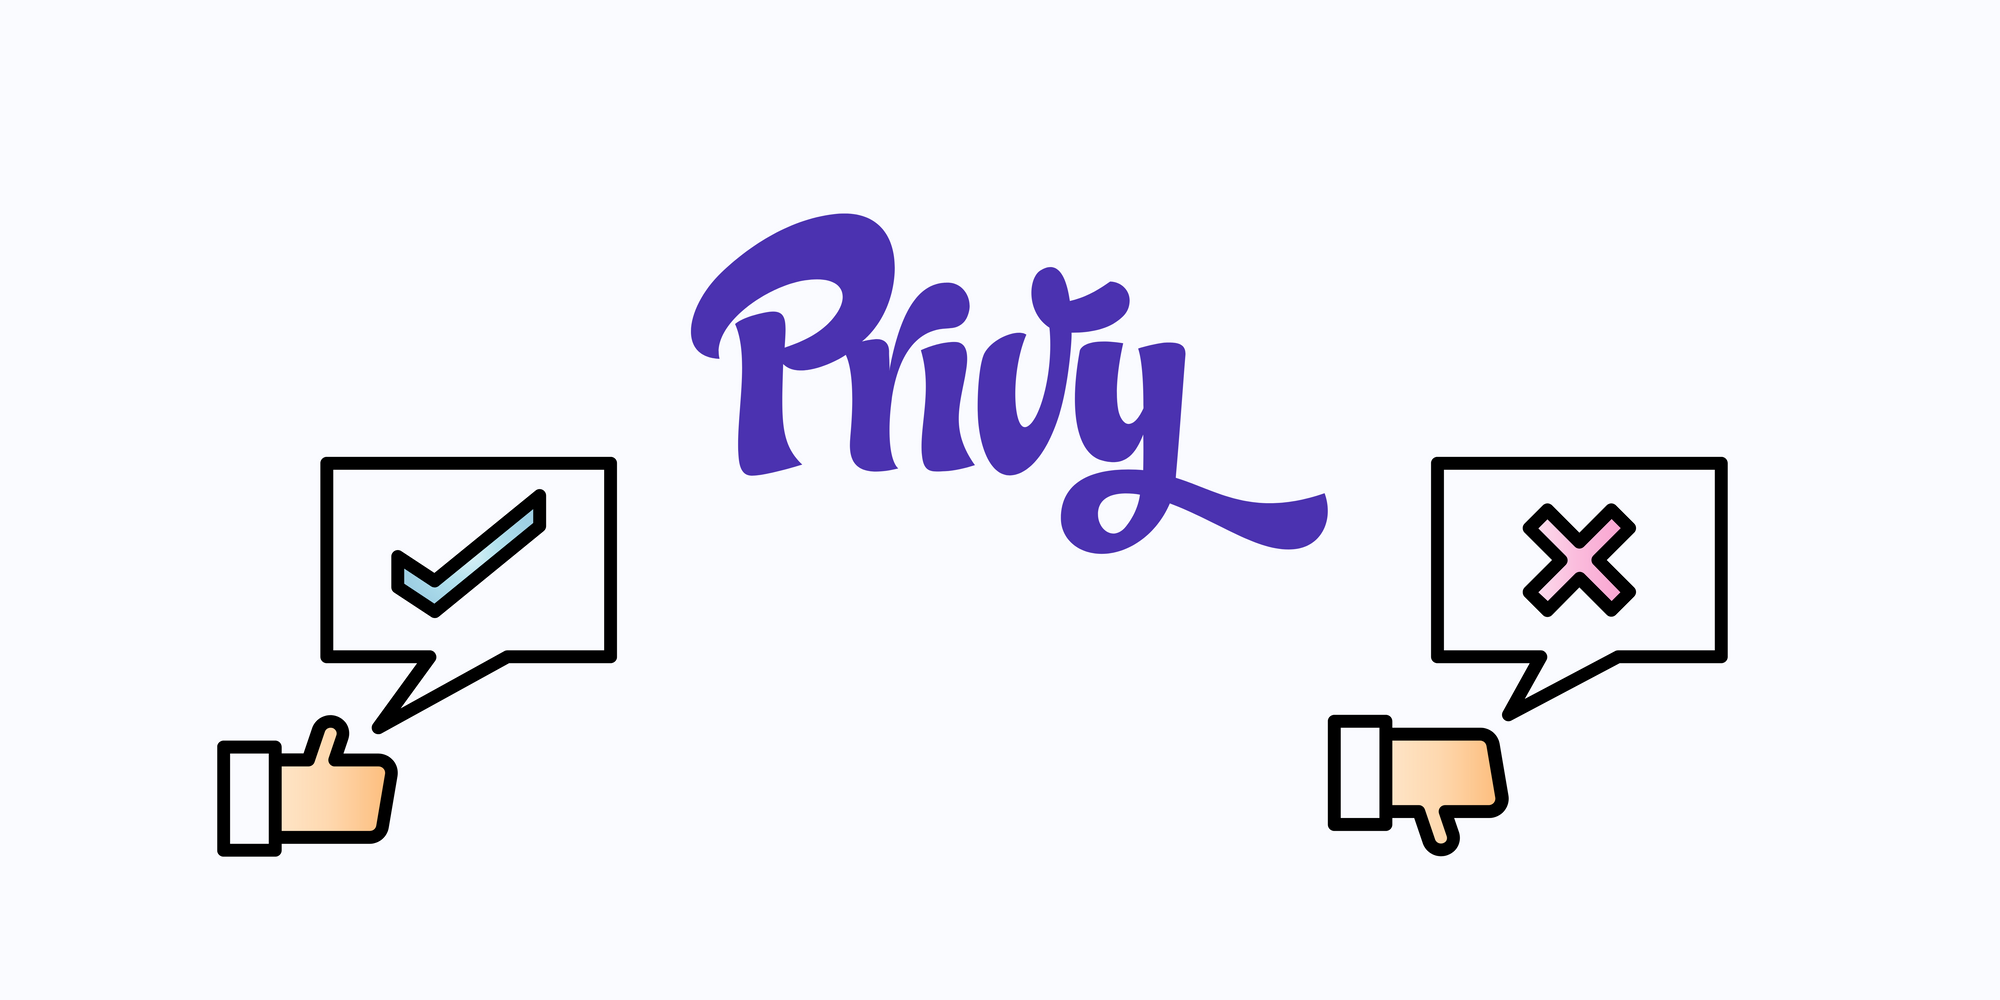 Privy icon, check and x icons with thumbs-up & thumbs-down on fair background to talk about the pros and cons